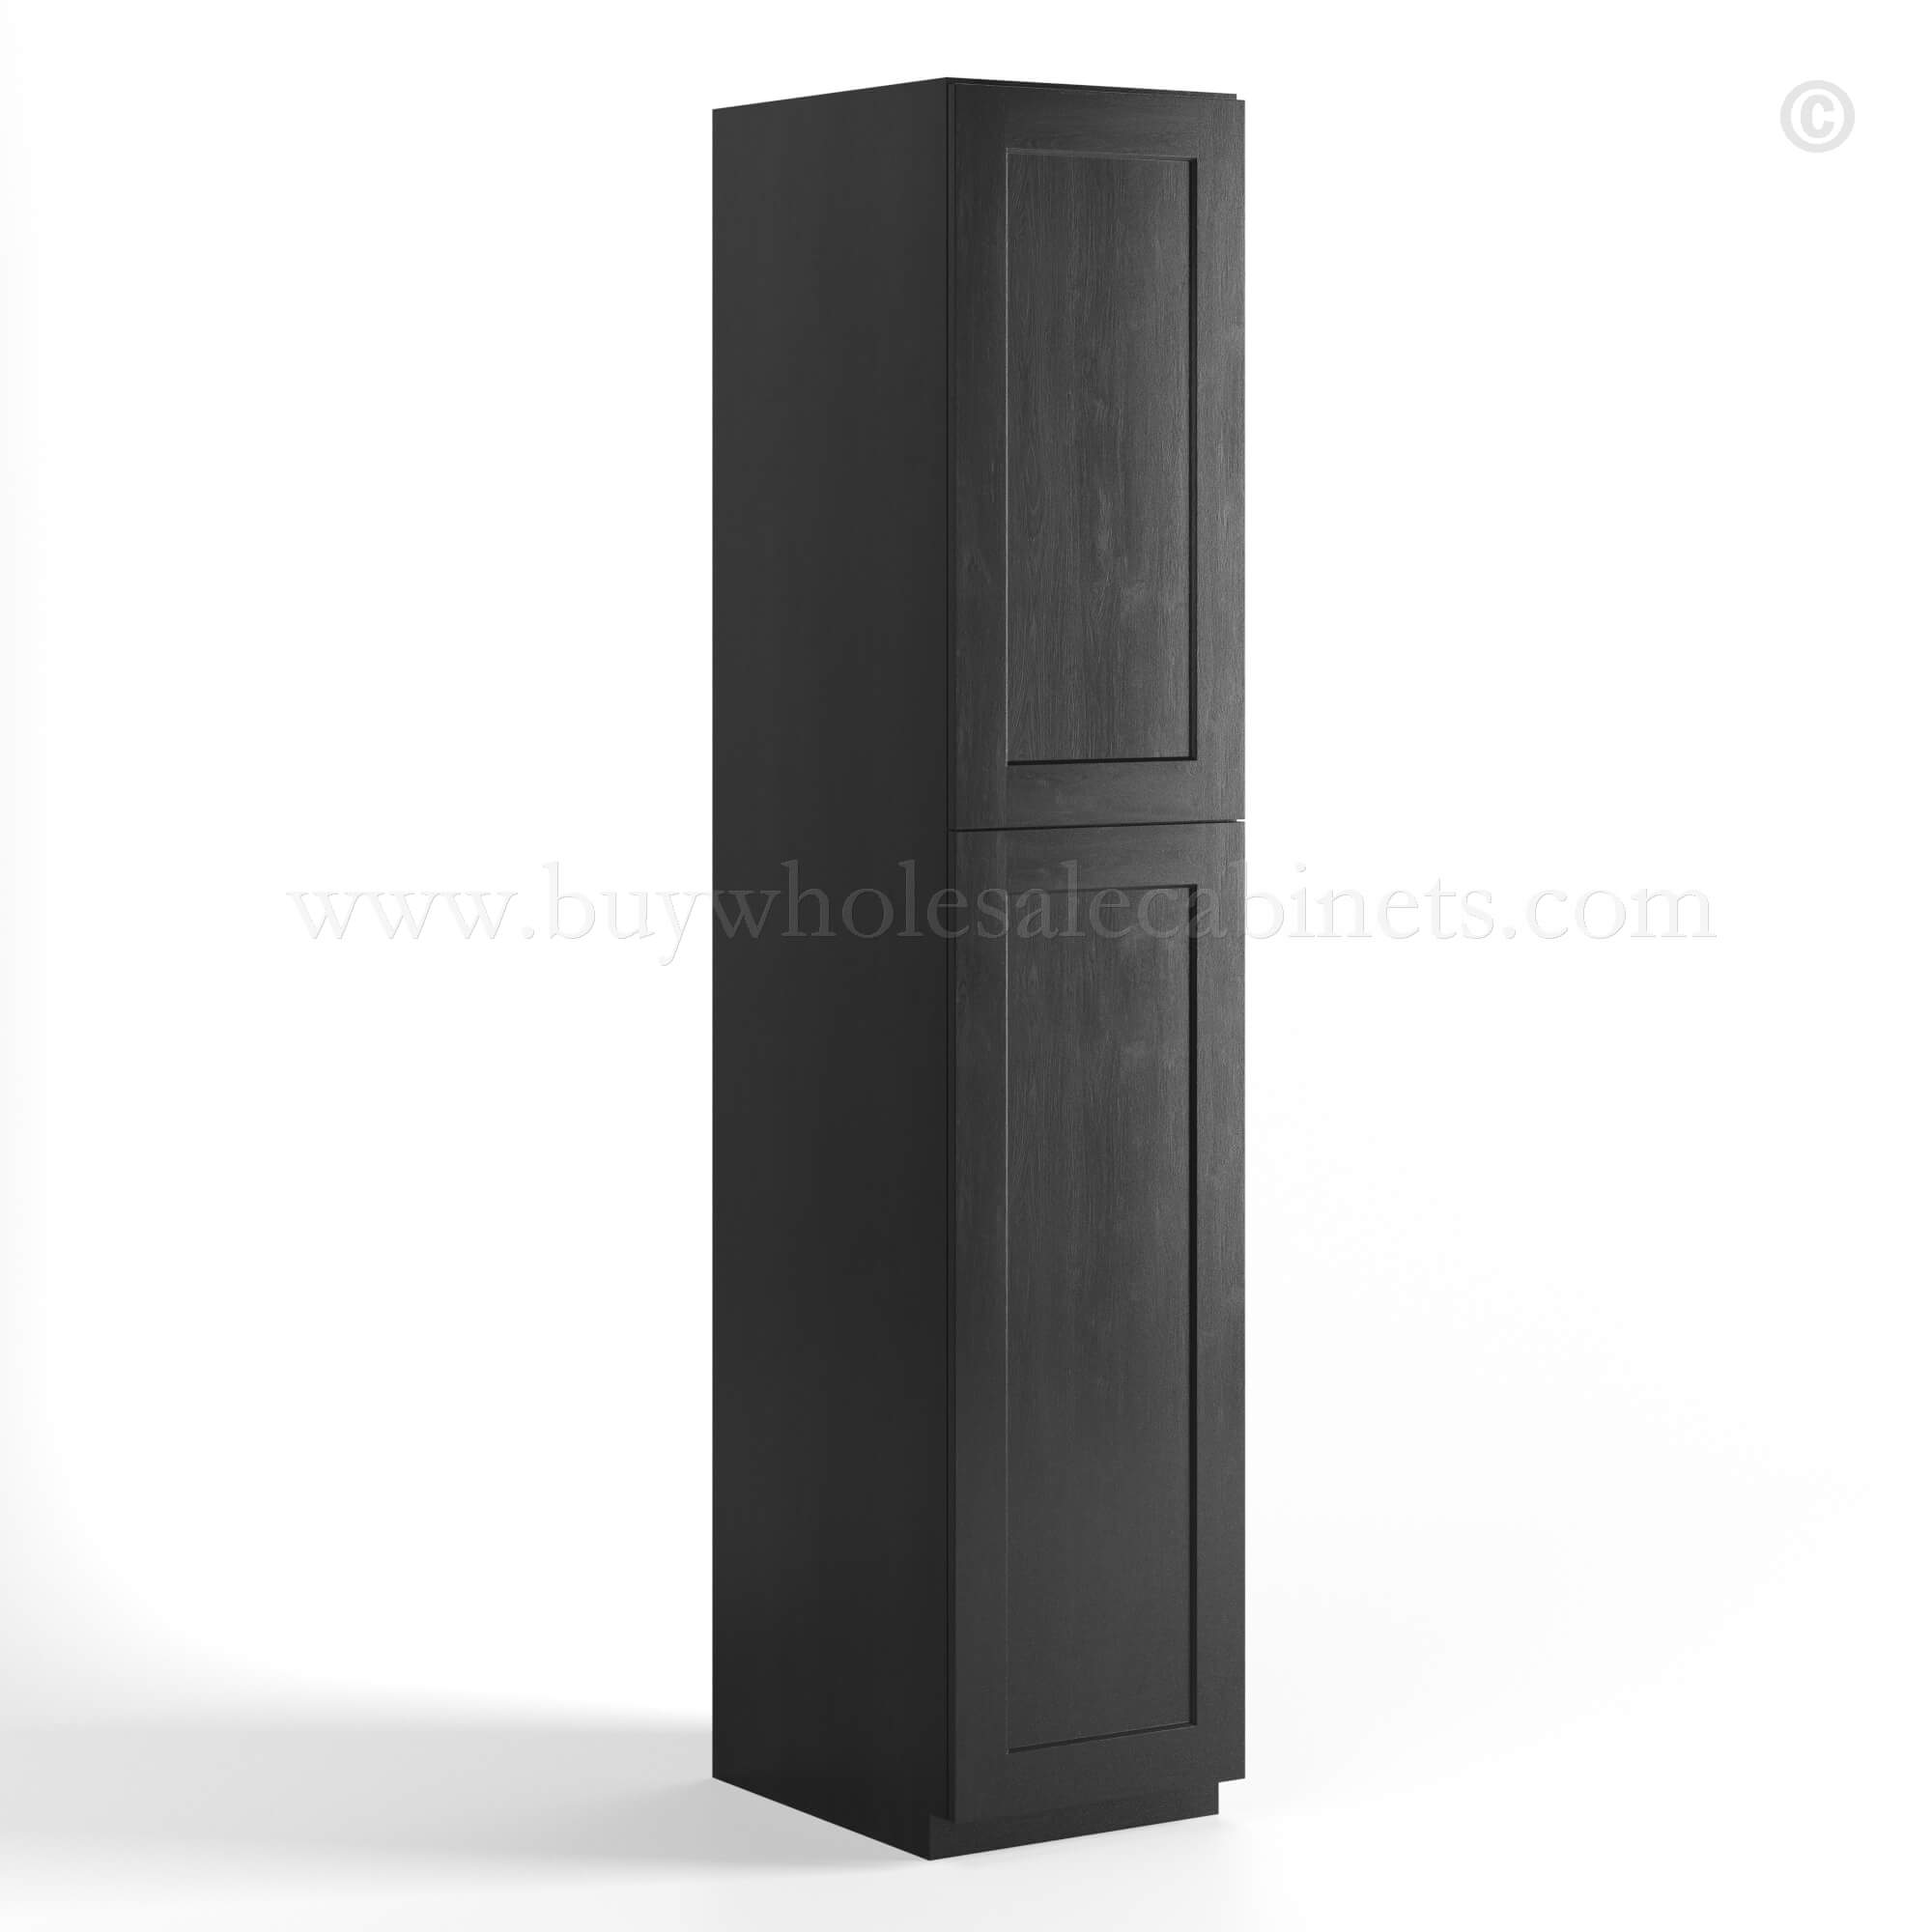 Charcoal Black Shaker Tall Pantry Cabinet 2 Doors, rta cabinets, wholesale cabinets